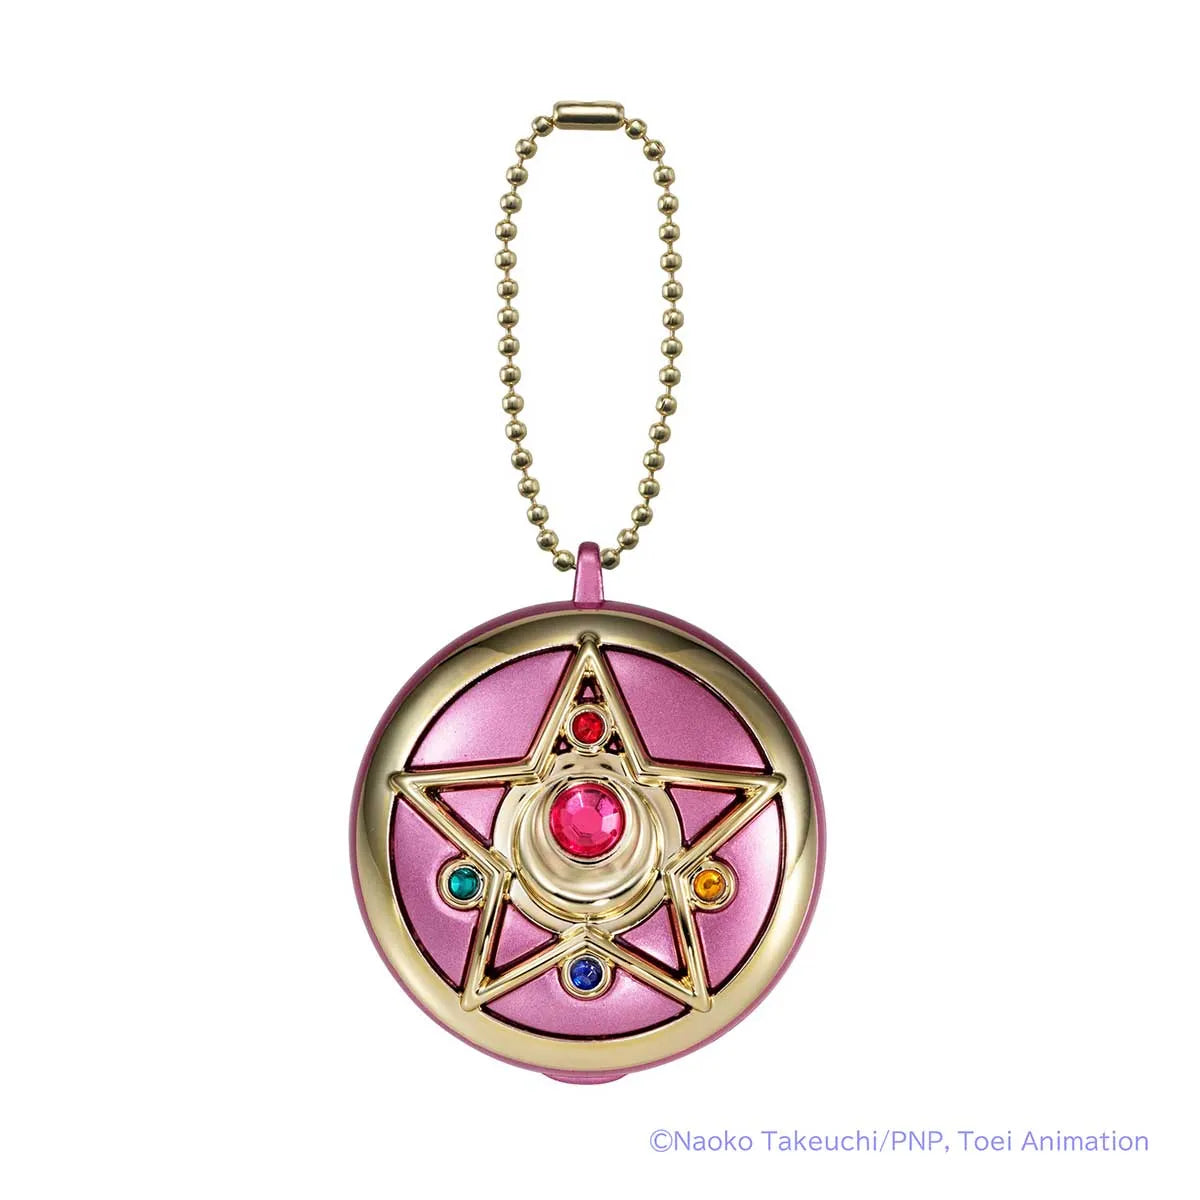 Sailor Moon - Compact and Crystal Star Mini Keychain Set image count 1